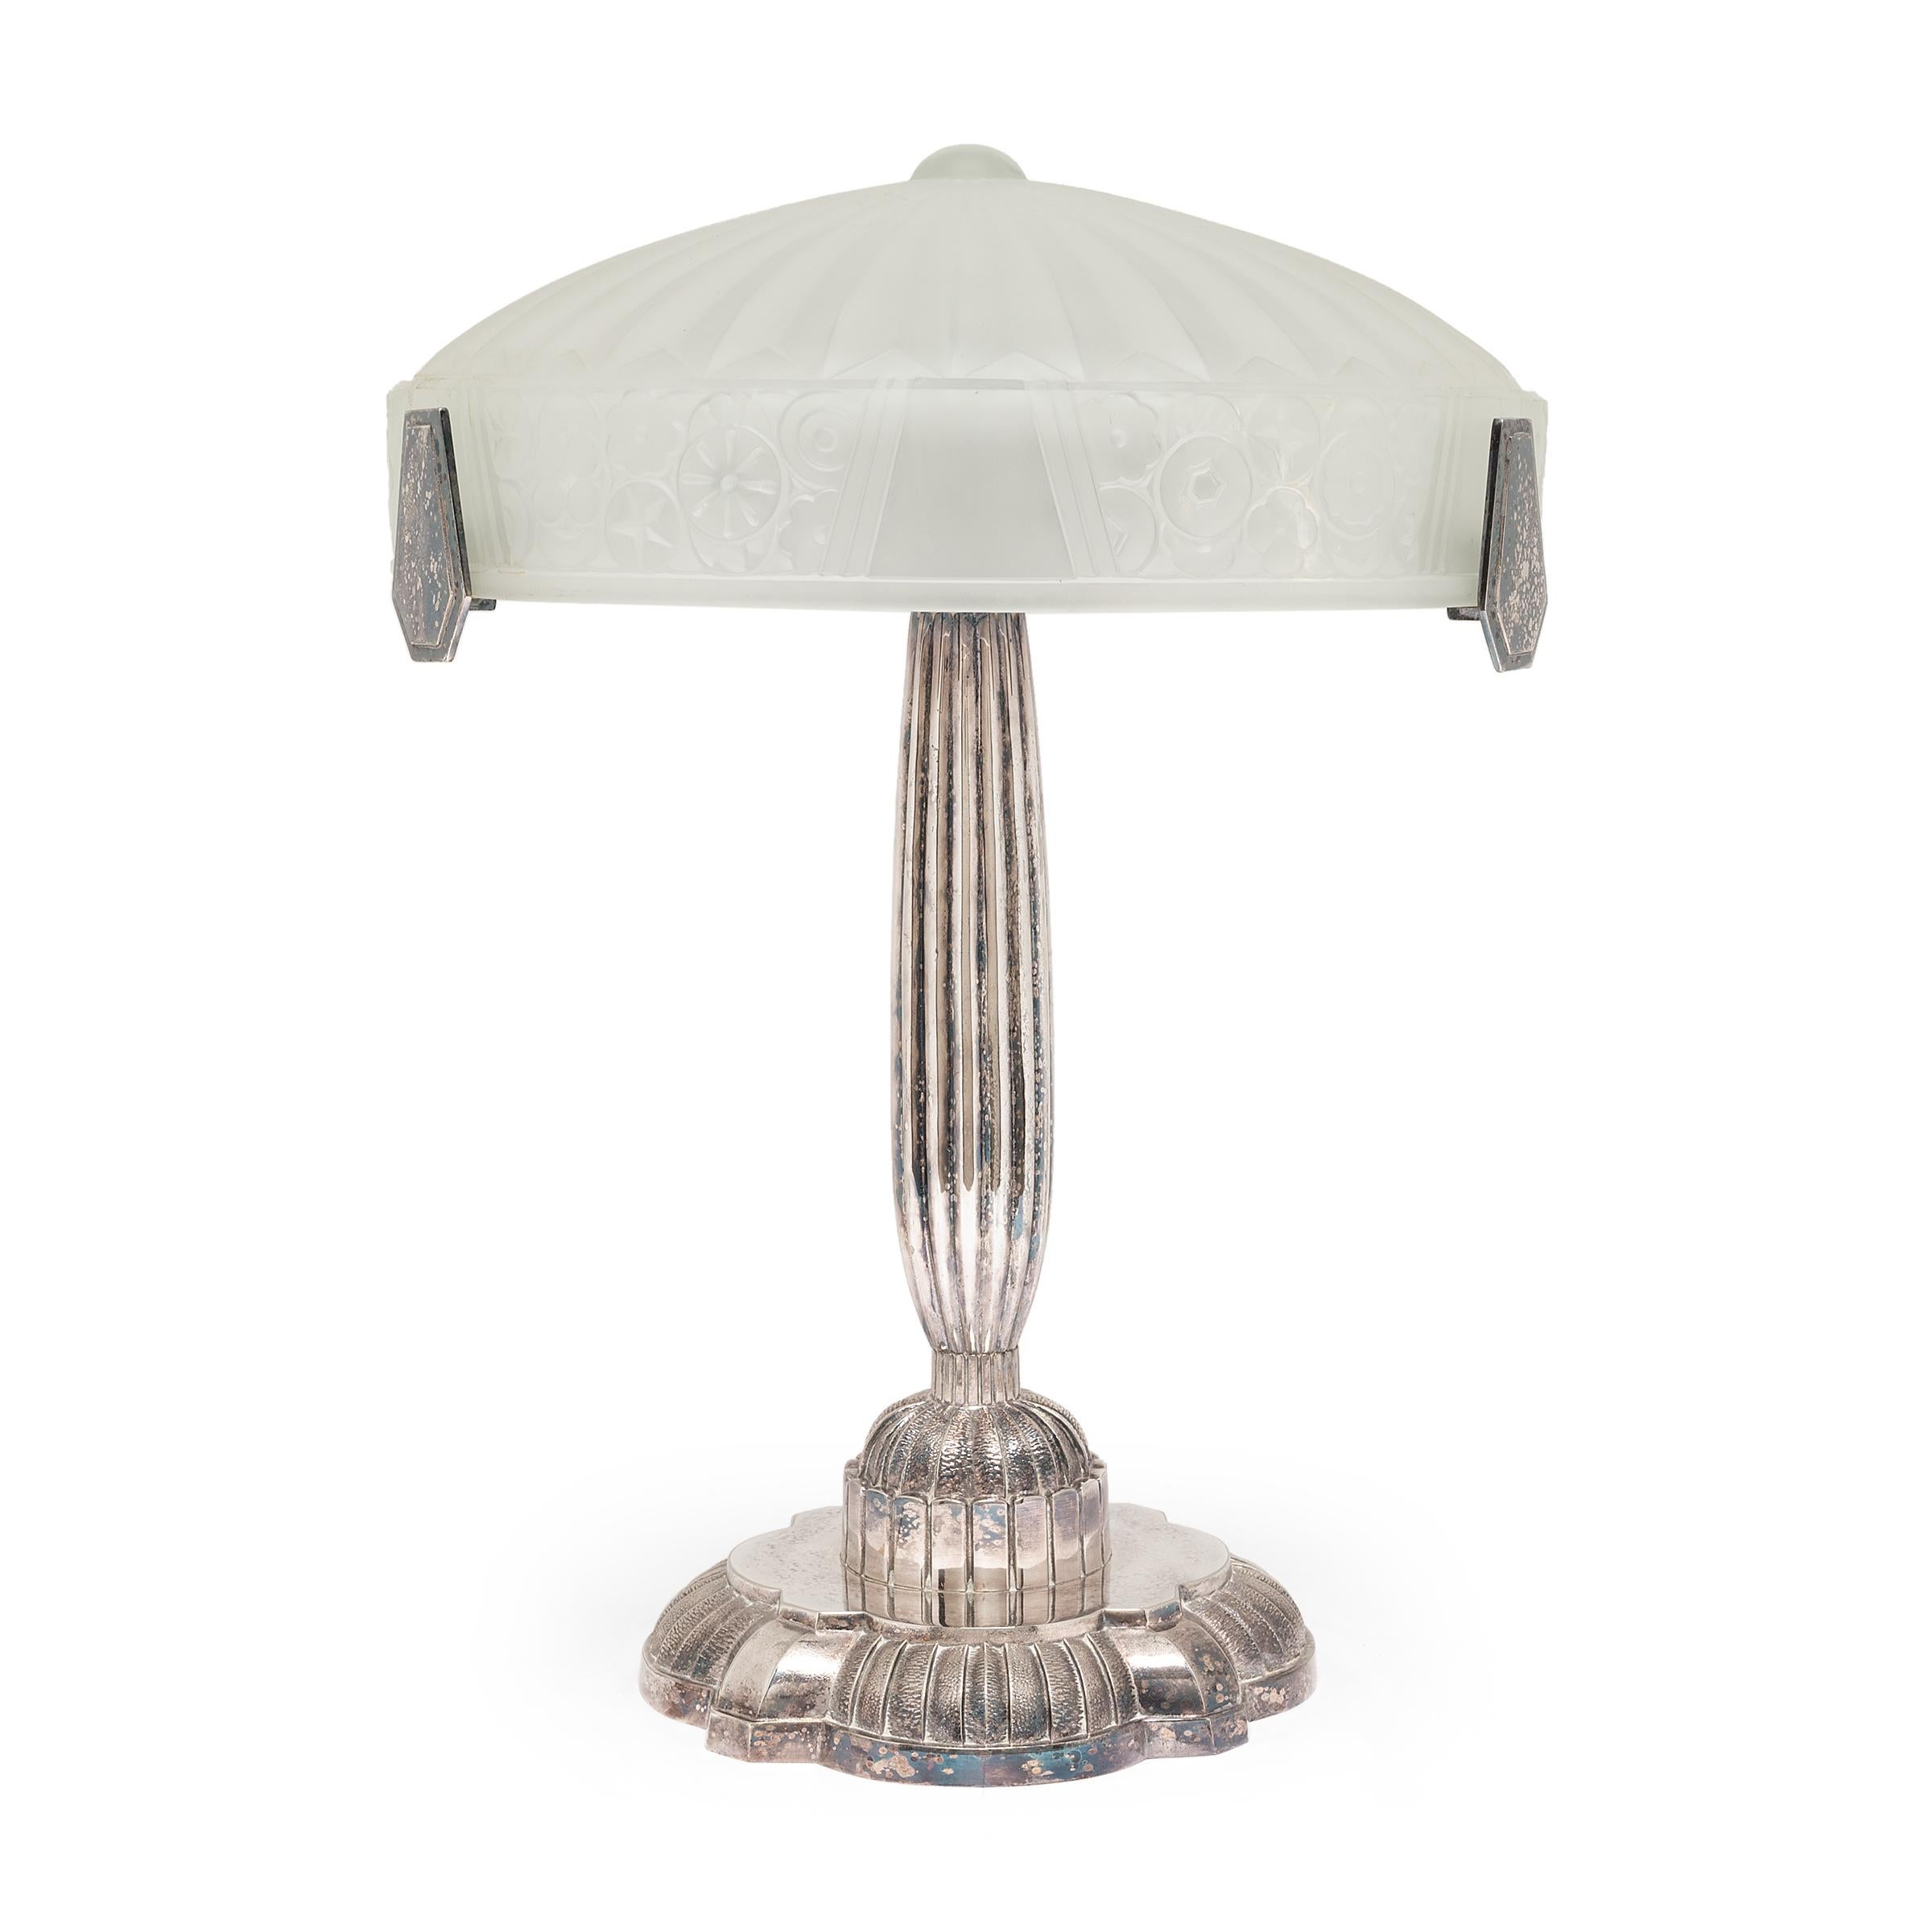 Art Deco Pair of French Deco Reproduction Table Lamps with Frosted Glass Shades